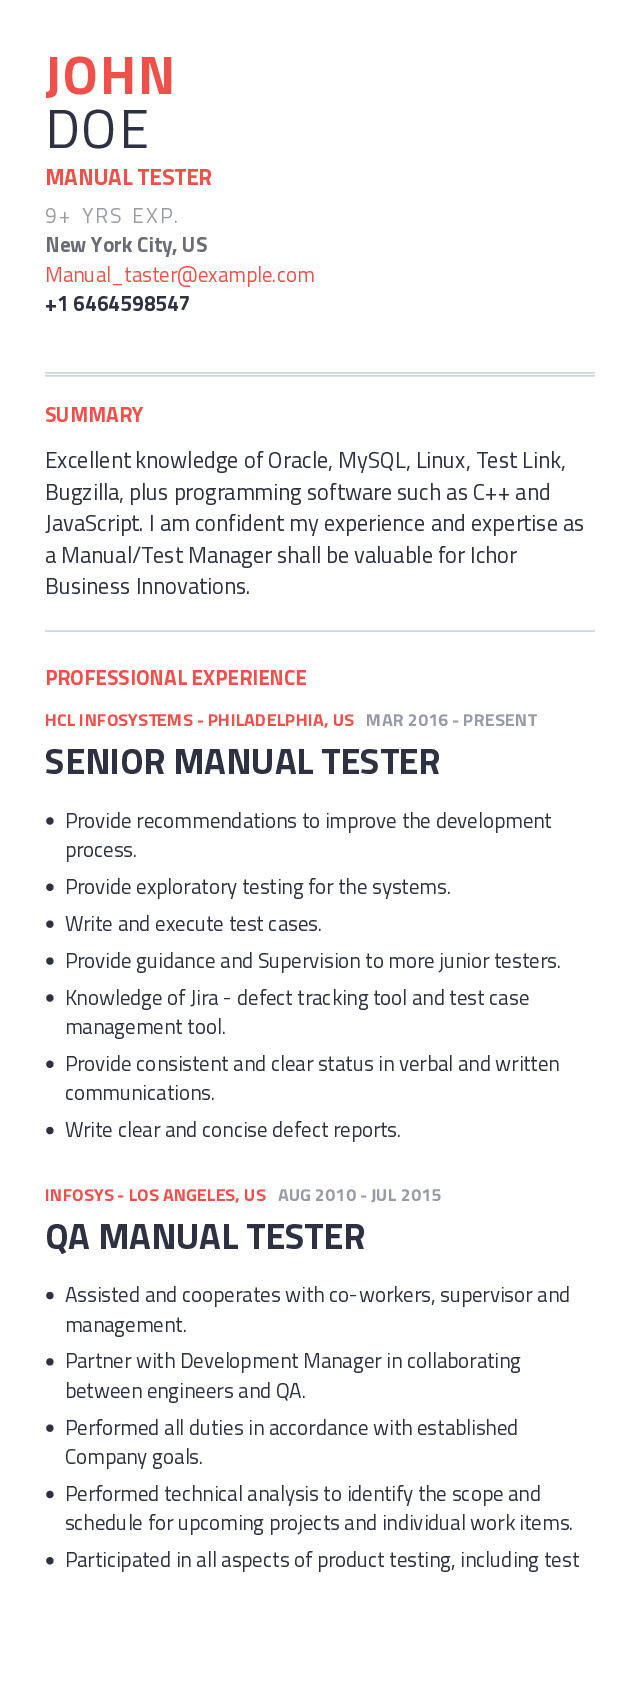 Sample Resume with Manual Testing Experience Manual Tester Resume Example with Content Sample Craftmycv